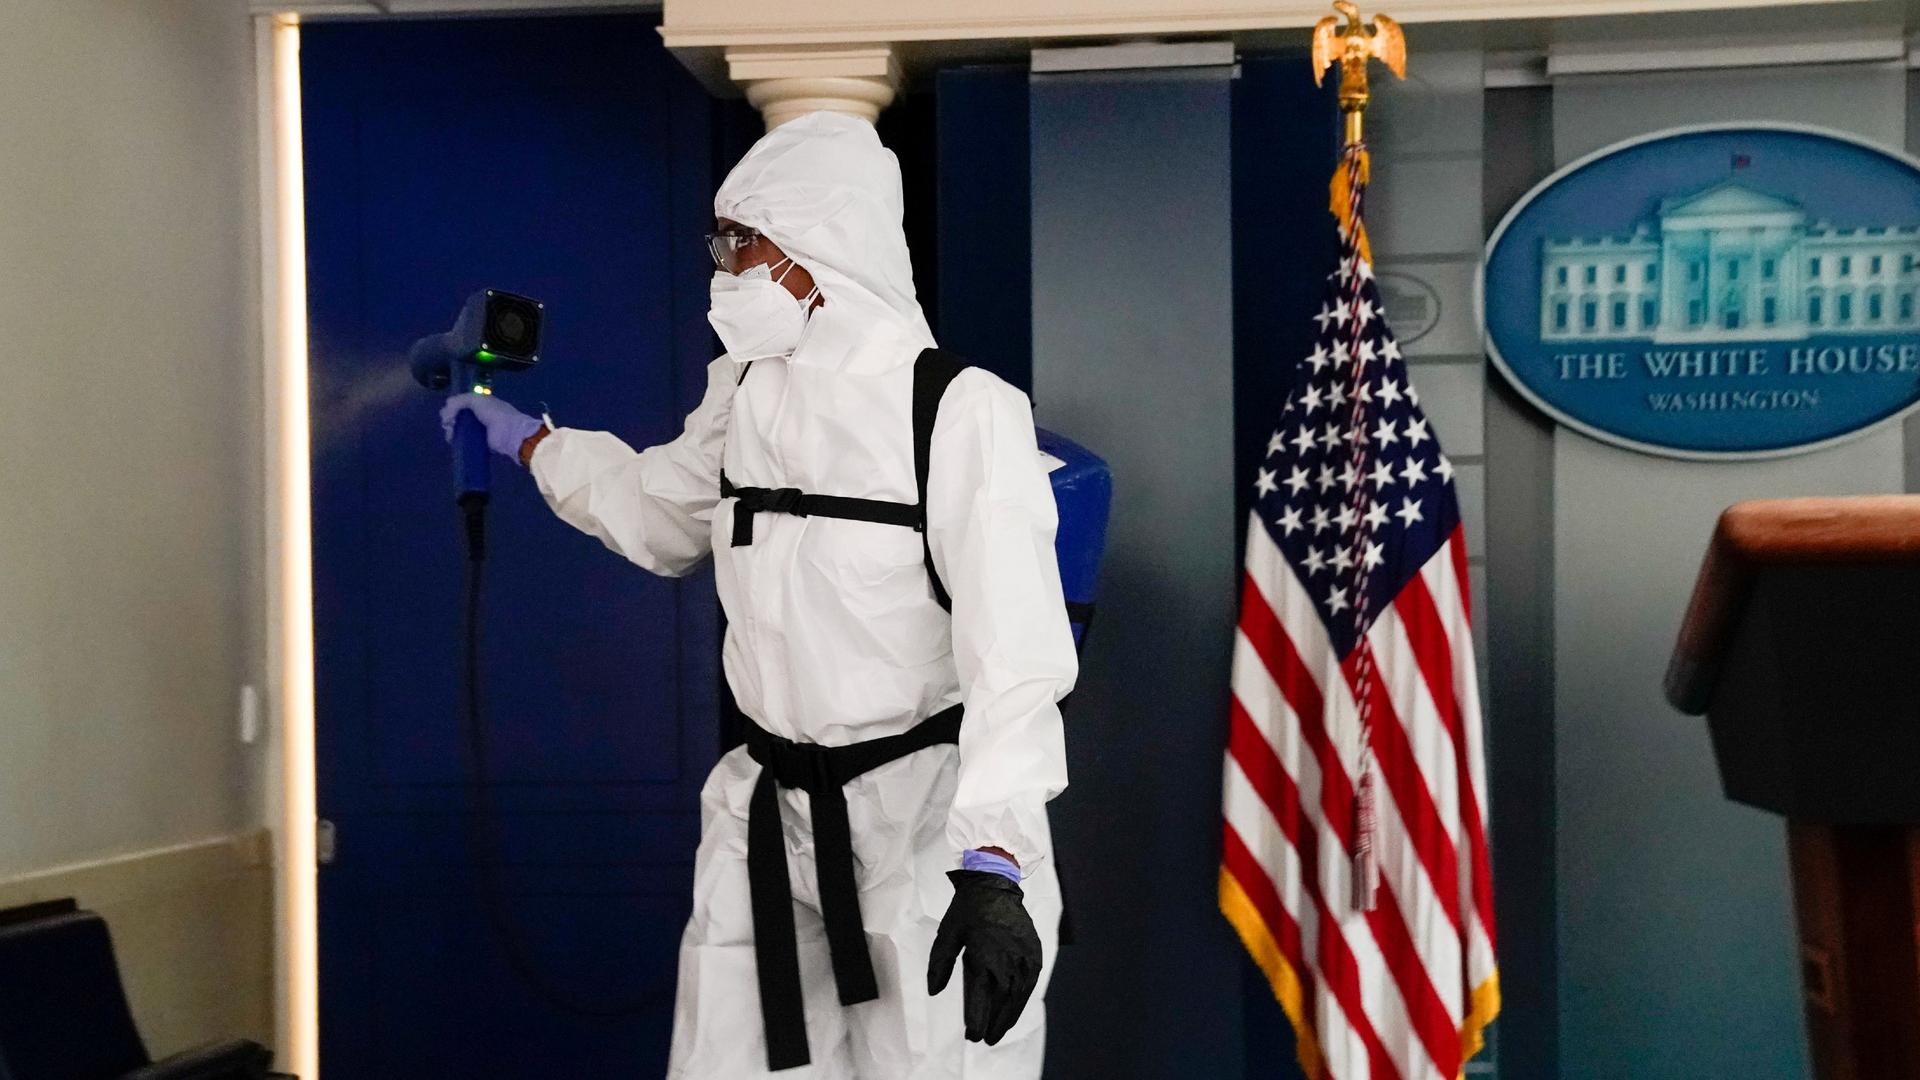 With full-body PPE and disinfecting equipment, a member of the White House cleaning staff sprays the press briefing room the evening of US President Donald Trump's return from Walter Reed Medical Center, in Washington, DC, Oct. 5, 2020.